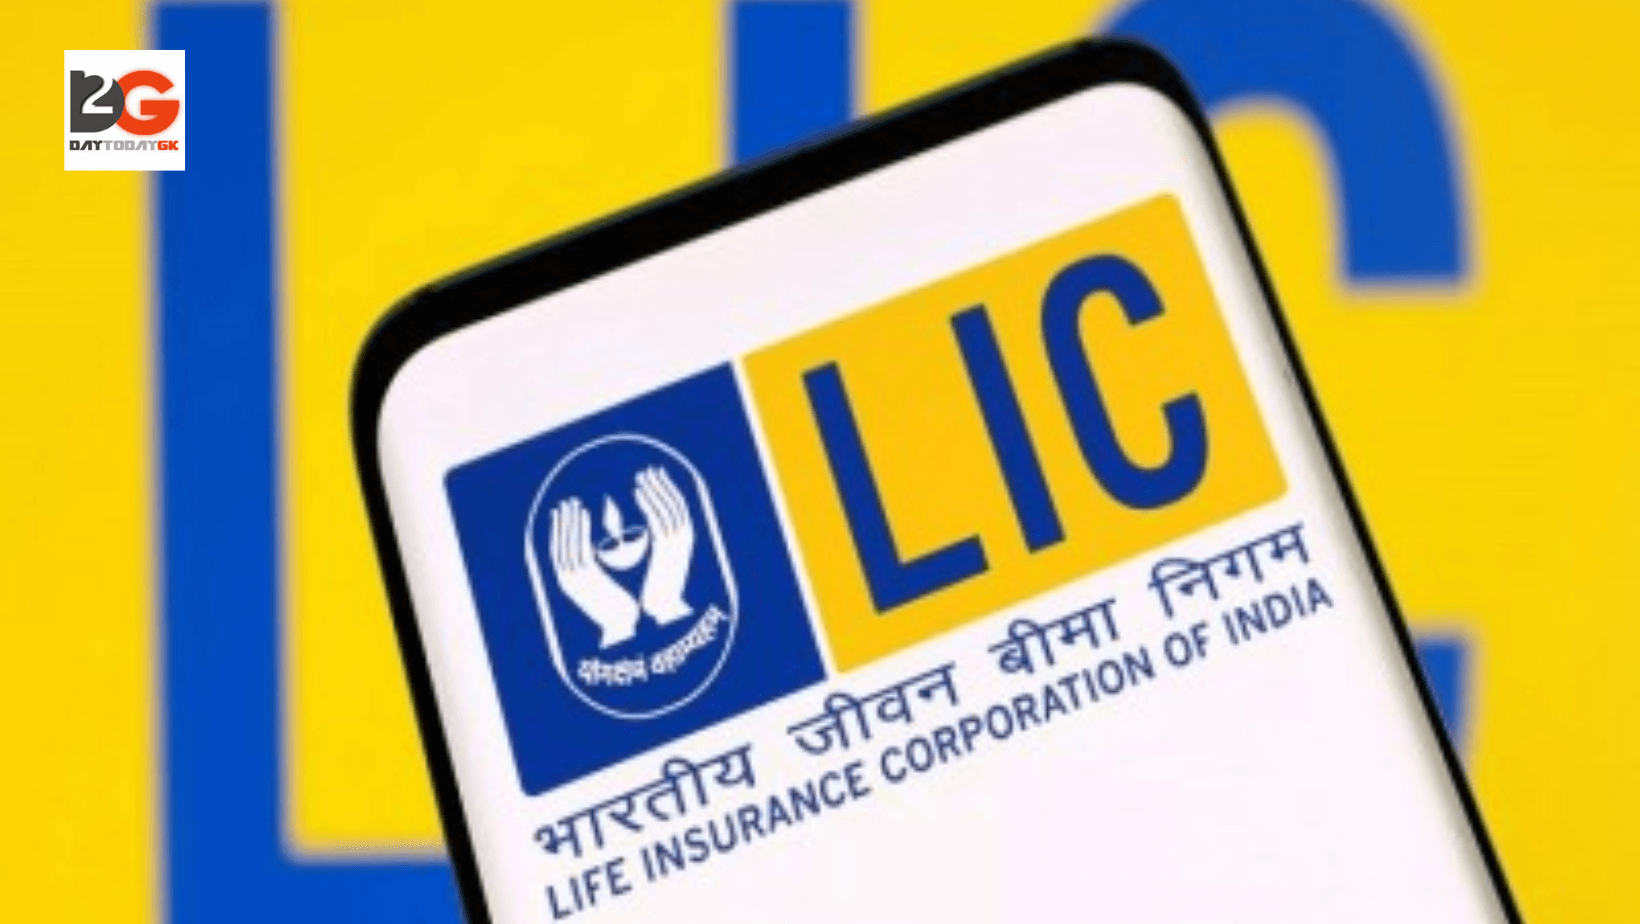 LIC Ranks Fourth Globally in S&P Global’s 2022 Insurance Report